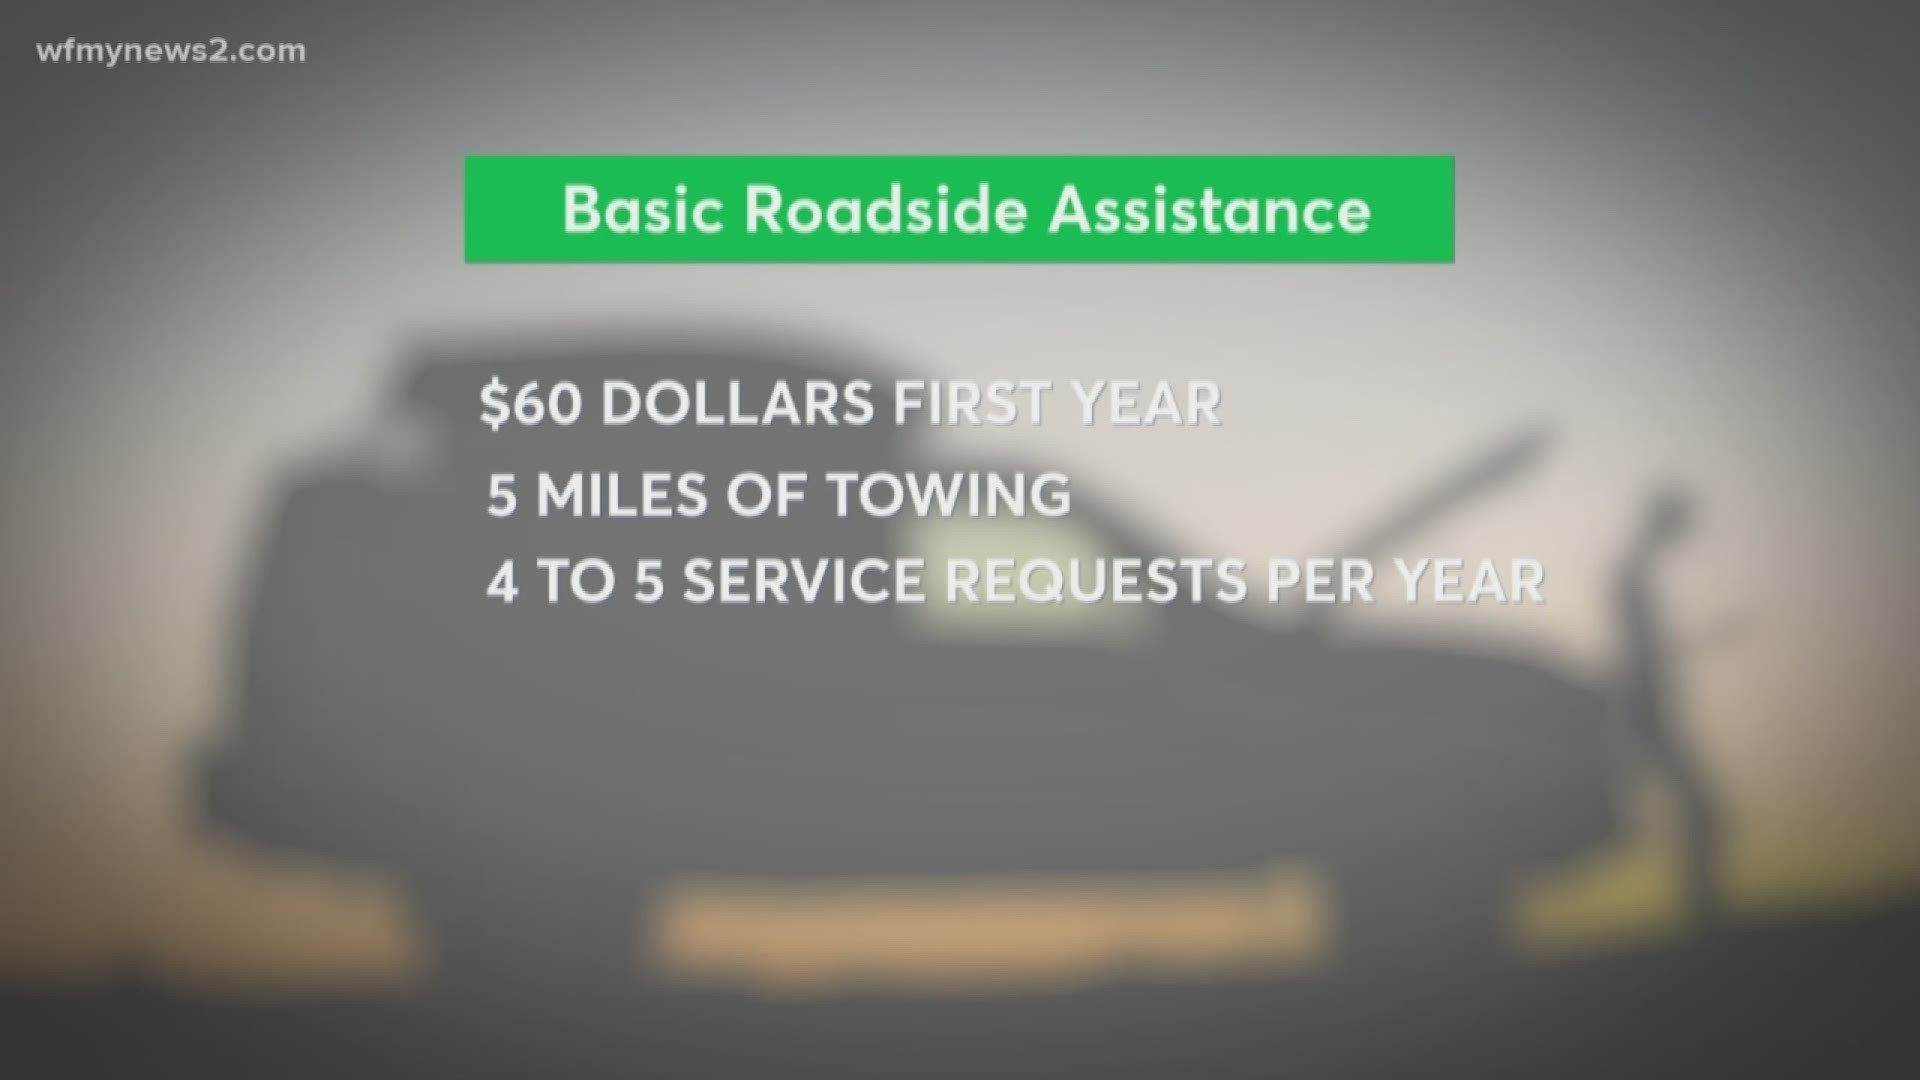 Should you buy roadside assistance? And if so, what kind? Consumer Reports takes a look at the options.